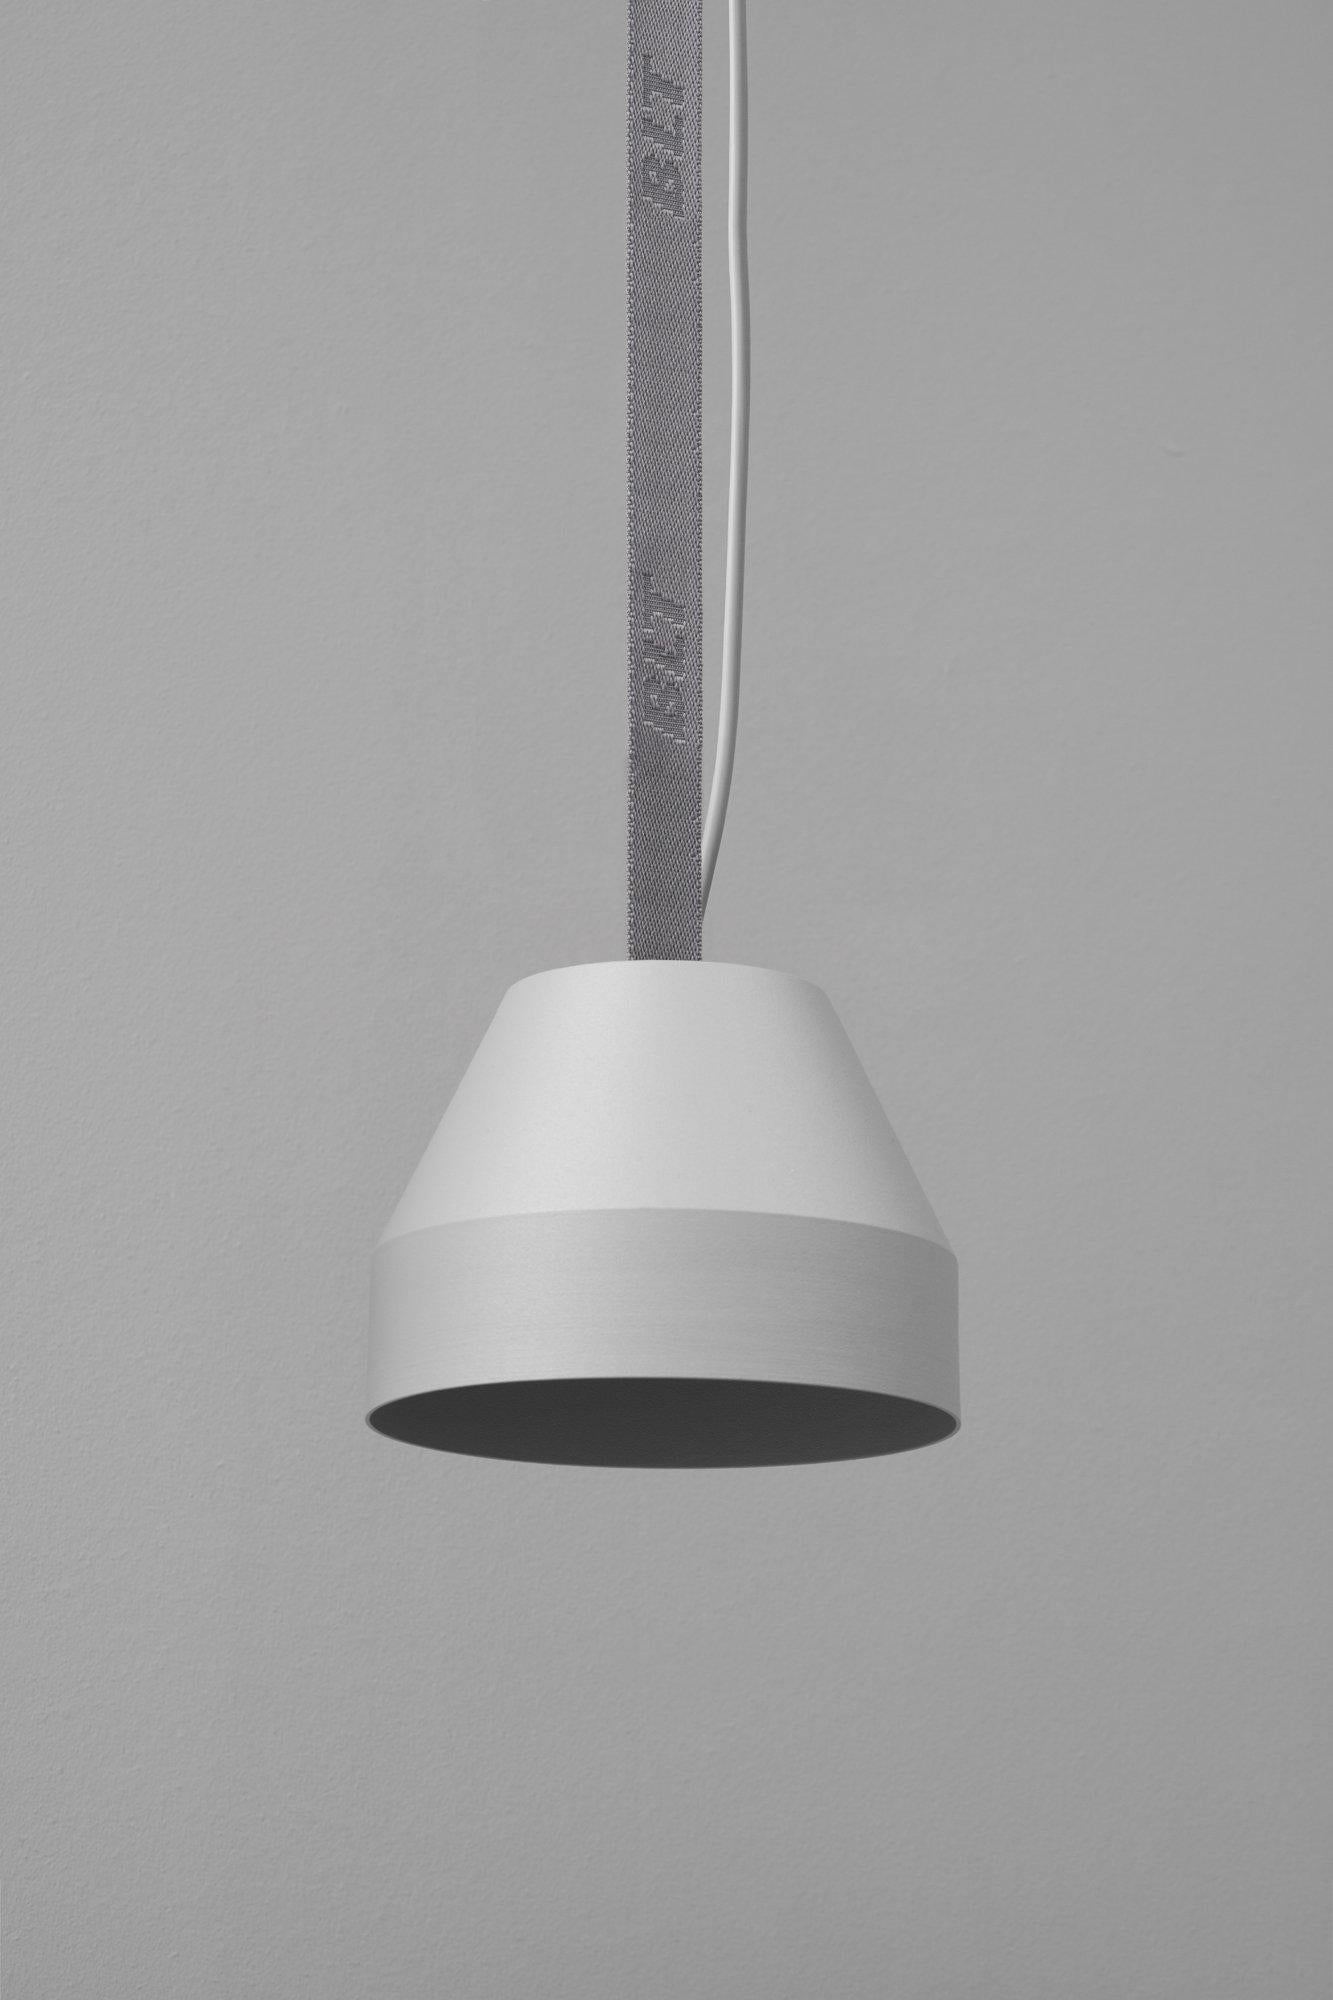 BLT_CAP Small Grey Pendant Lamp by +kouple
Dimensions: Ø 16 x H 12 cm. 
Materials: Powder-coated steel and textile.

Available in different color options. The rod length is 250 cm. Please contact us.

All our lamps can be wired according to each